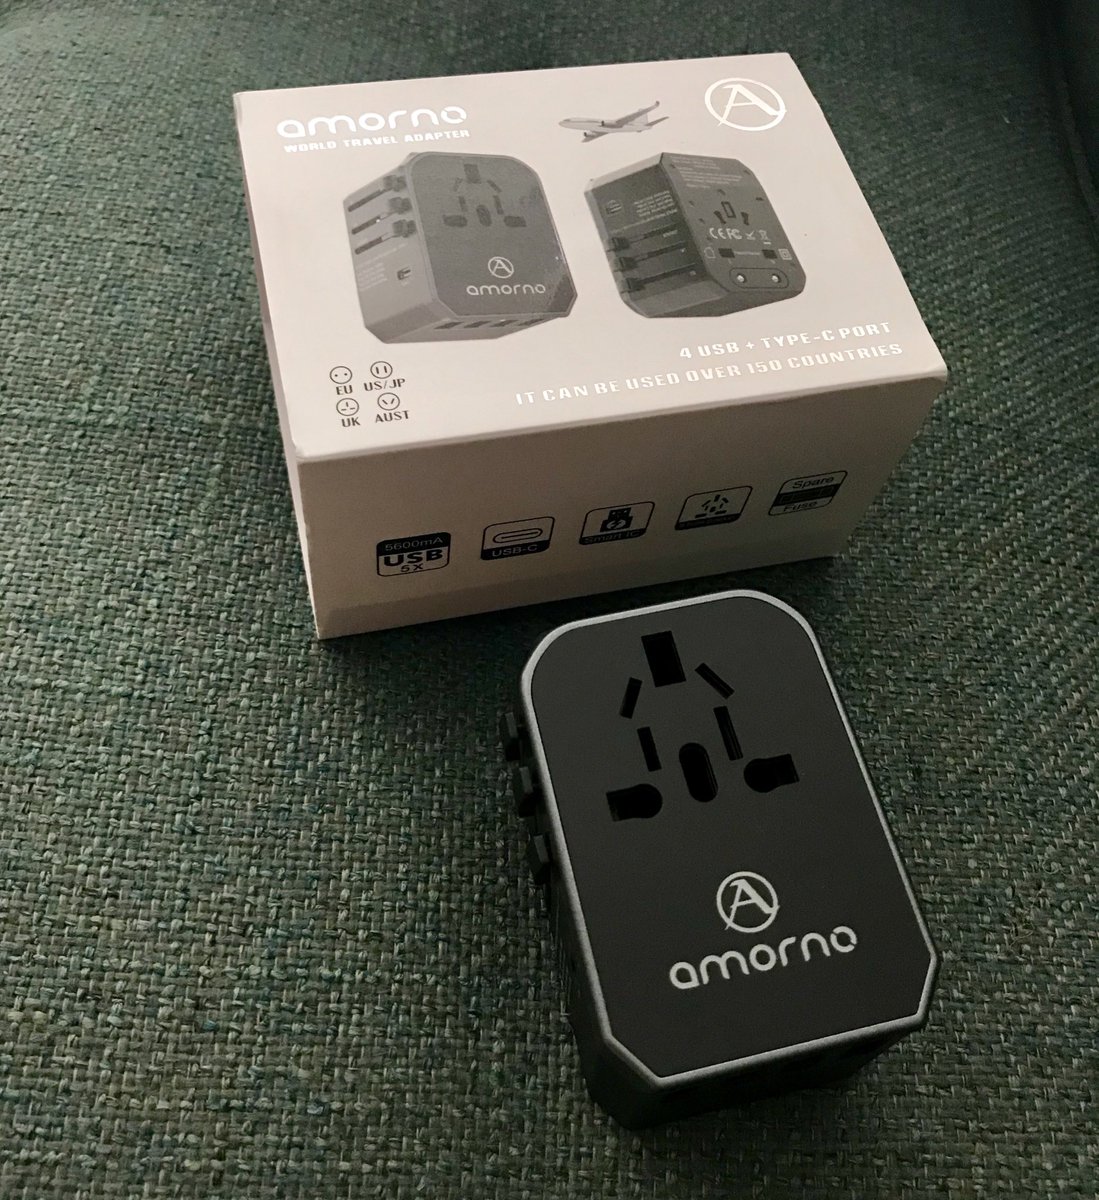 Just about ready for my upcoming #InternationalTrip thanks to @photojoseph’s travel adapter recommendation from his post on @UpsideTravel’s blog: bit.ly/2szonsN! 🔌